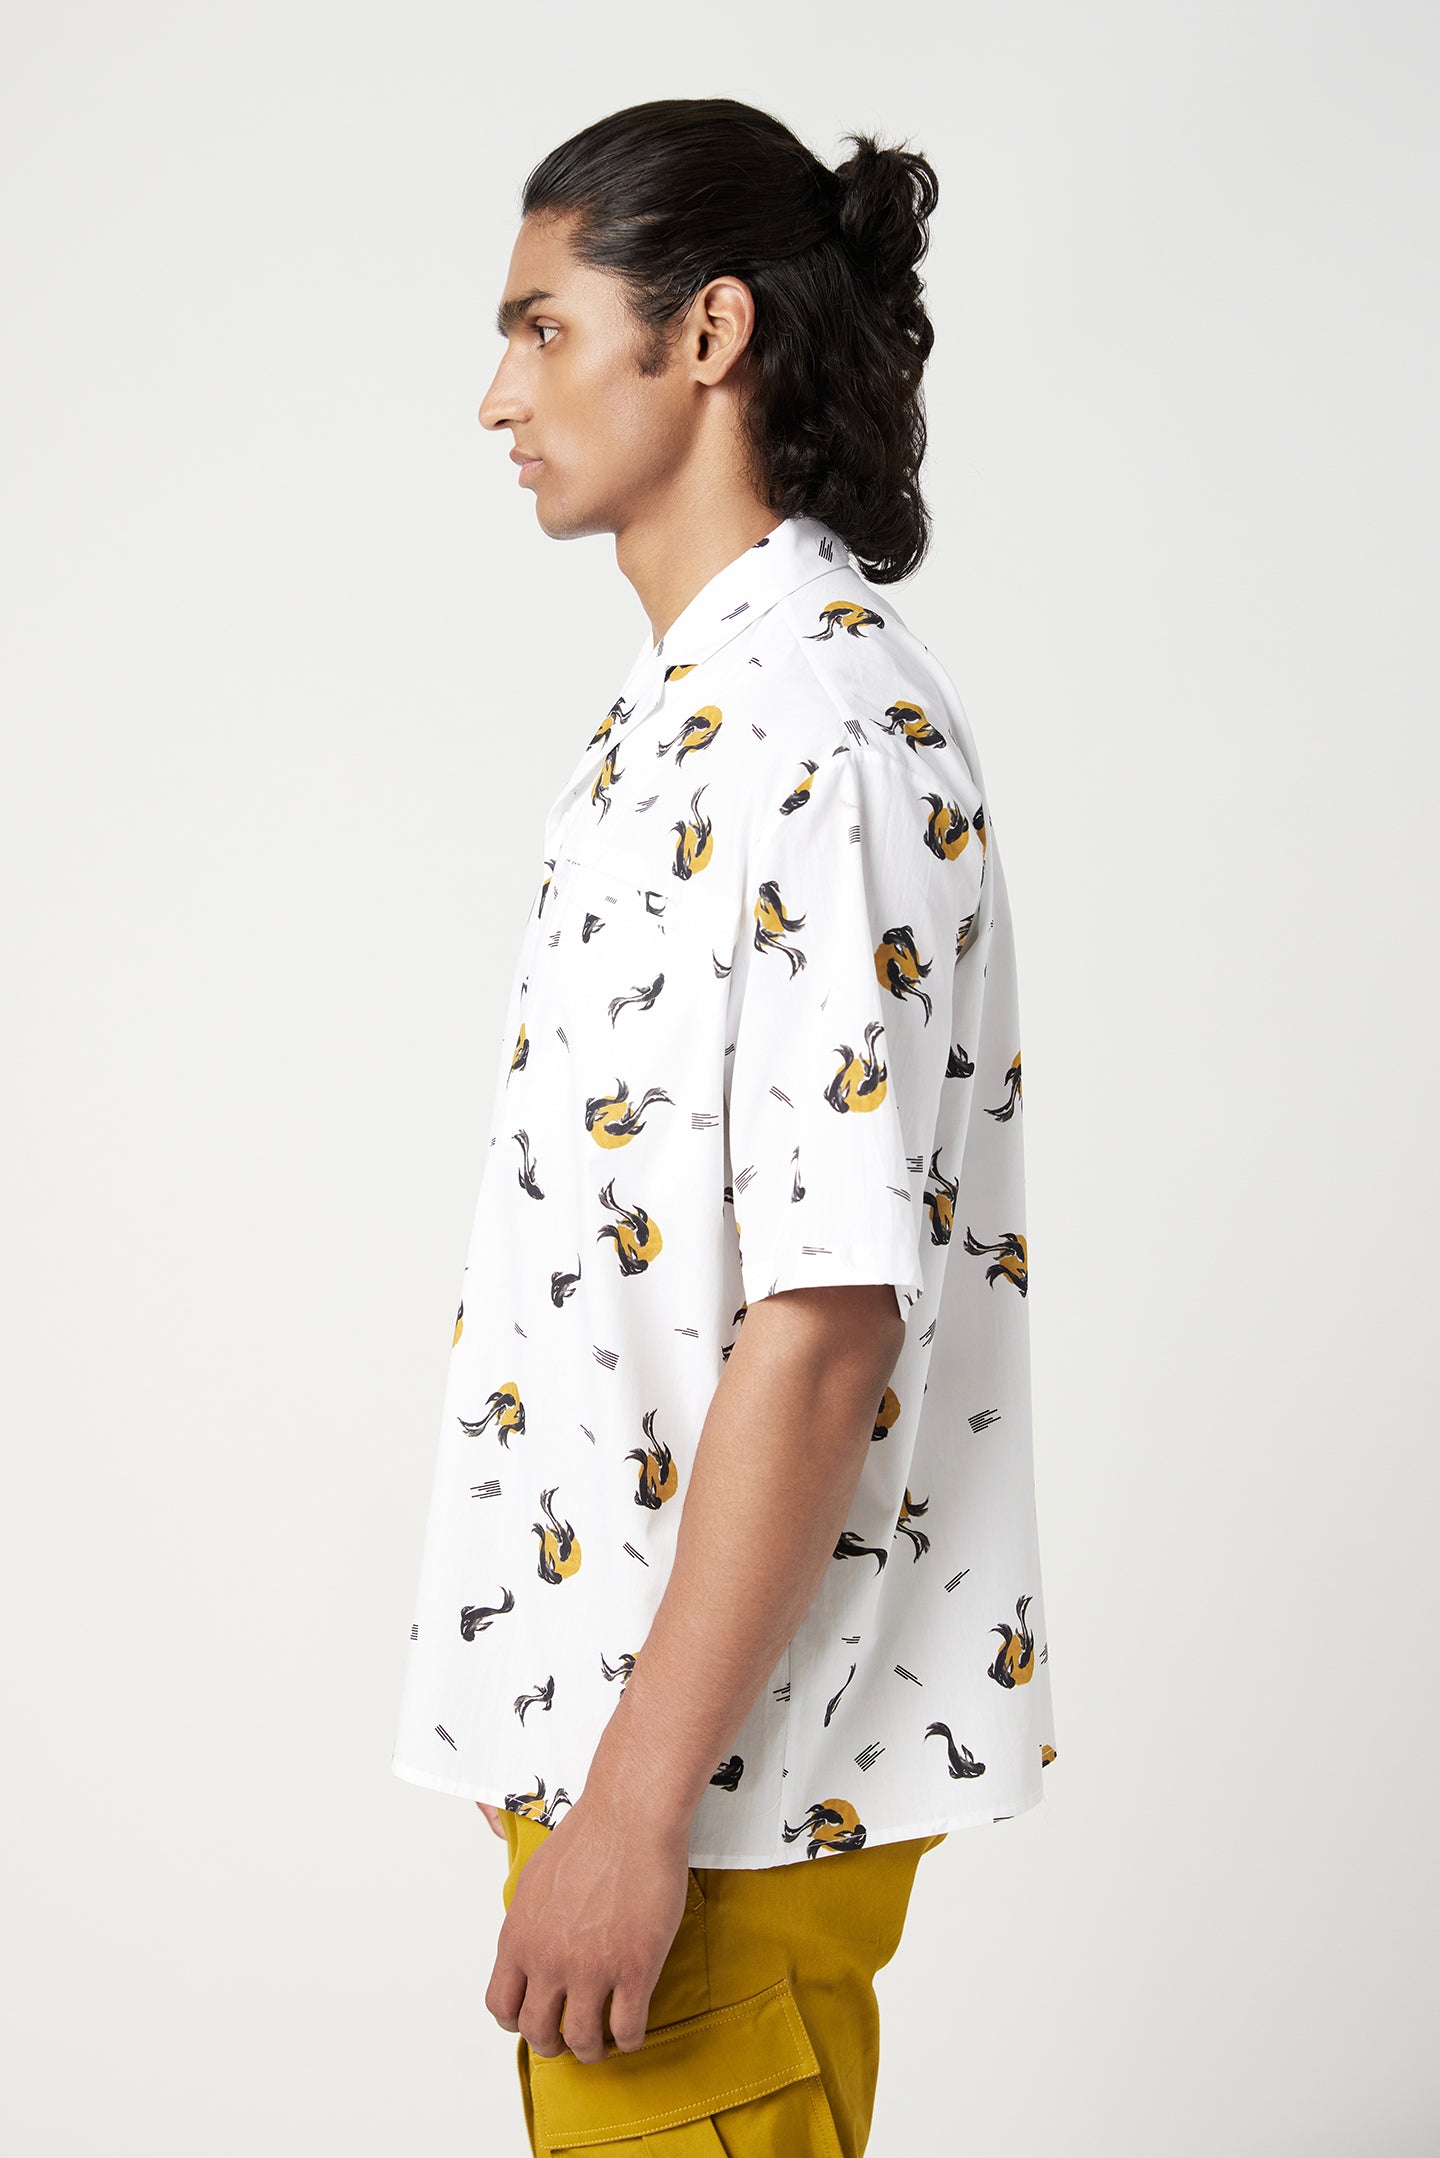 Easy Fit Half Sleeve Shirt in an All-Over Fish Print